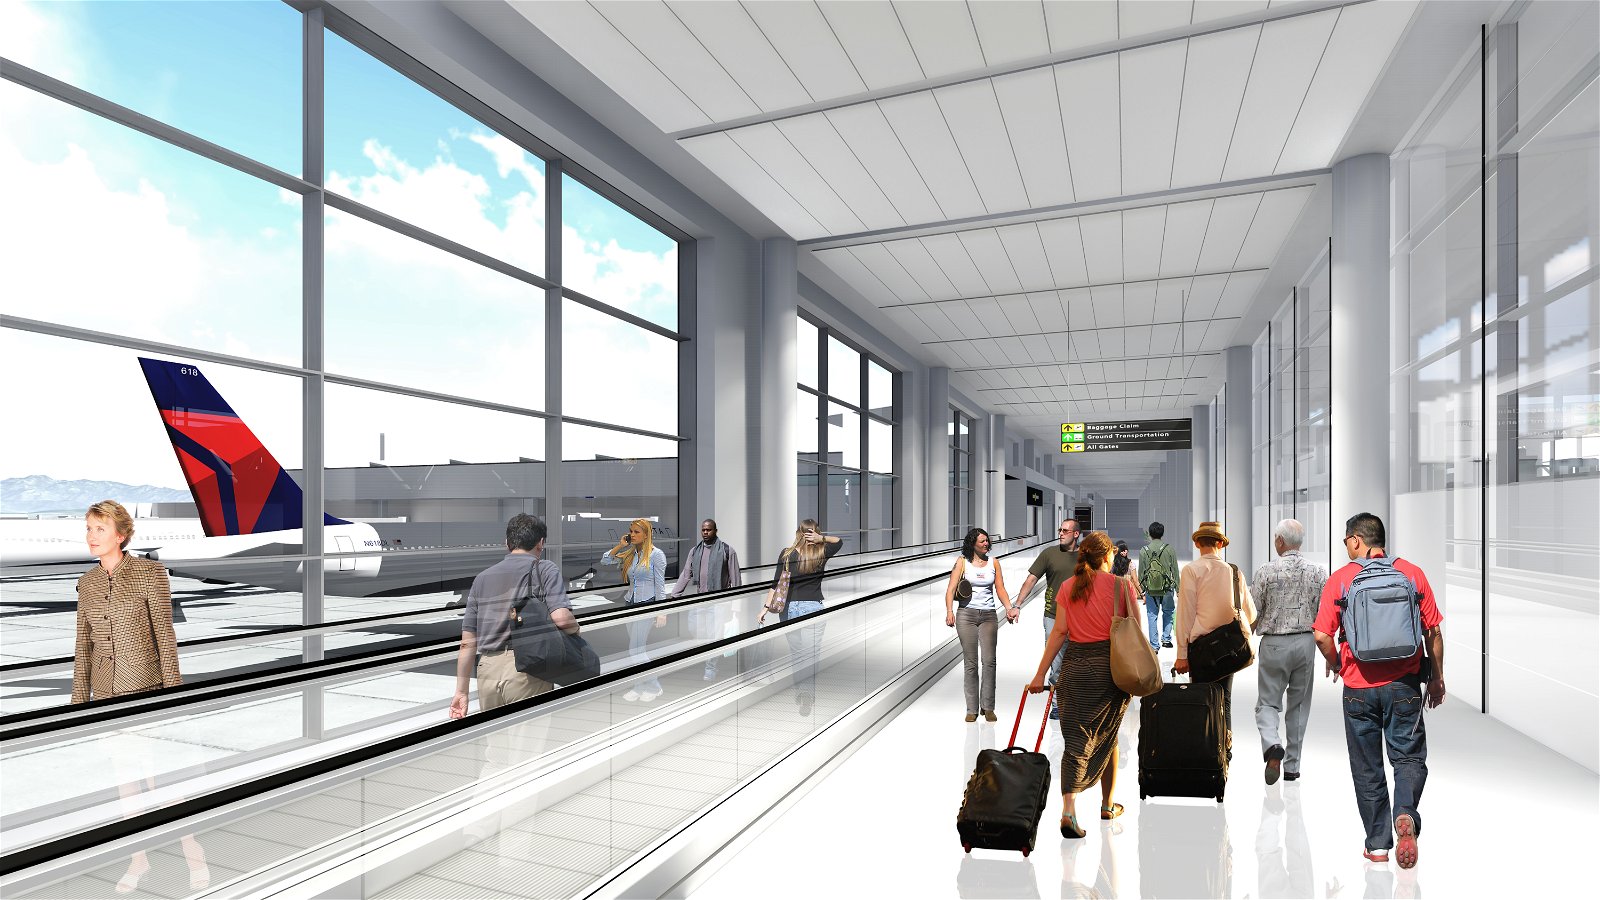 Delta's rendering of the secure TBIT/T3 connector, to be completed in 2019